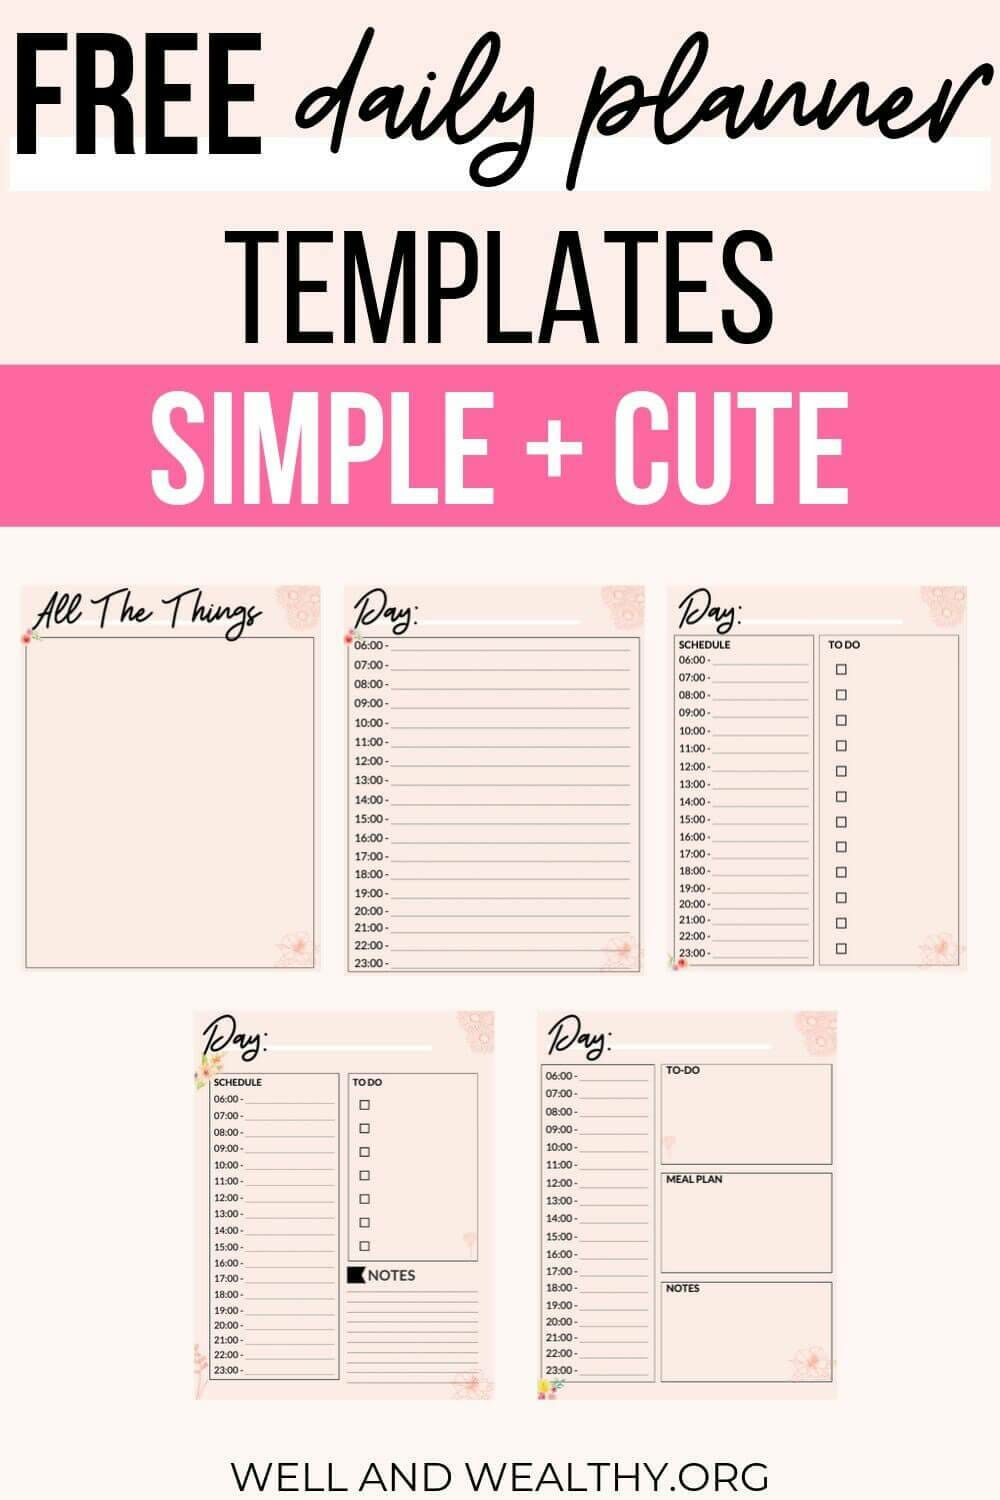 FREE Printable Daily Planner with Time Slots [So Cute!]